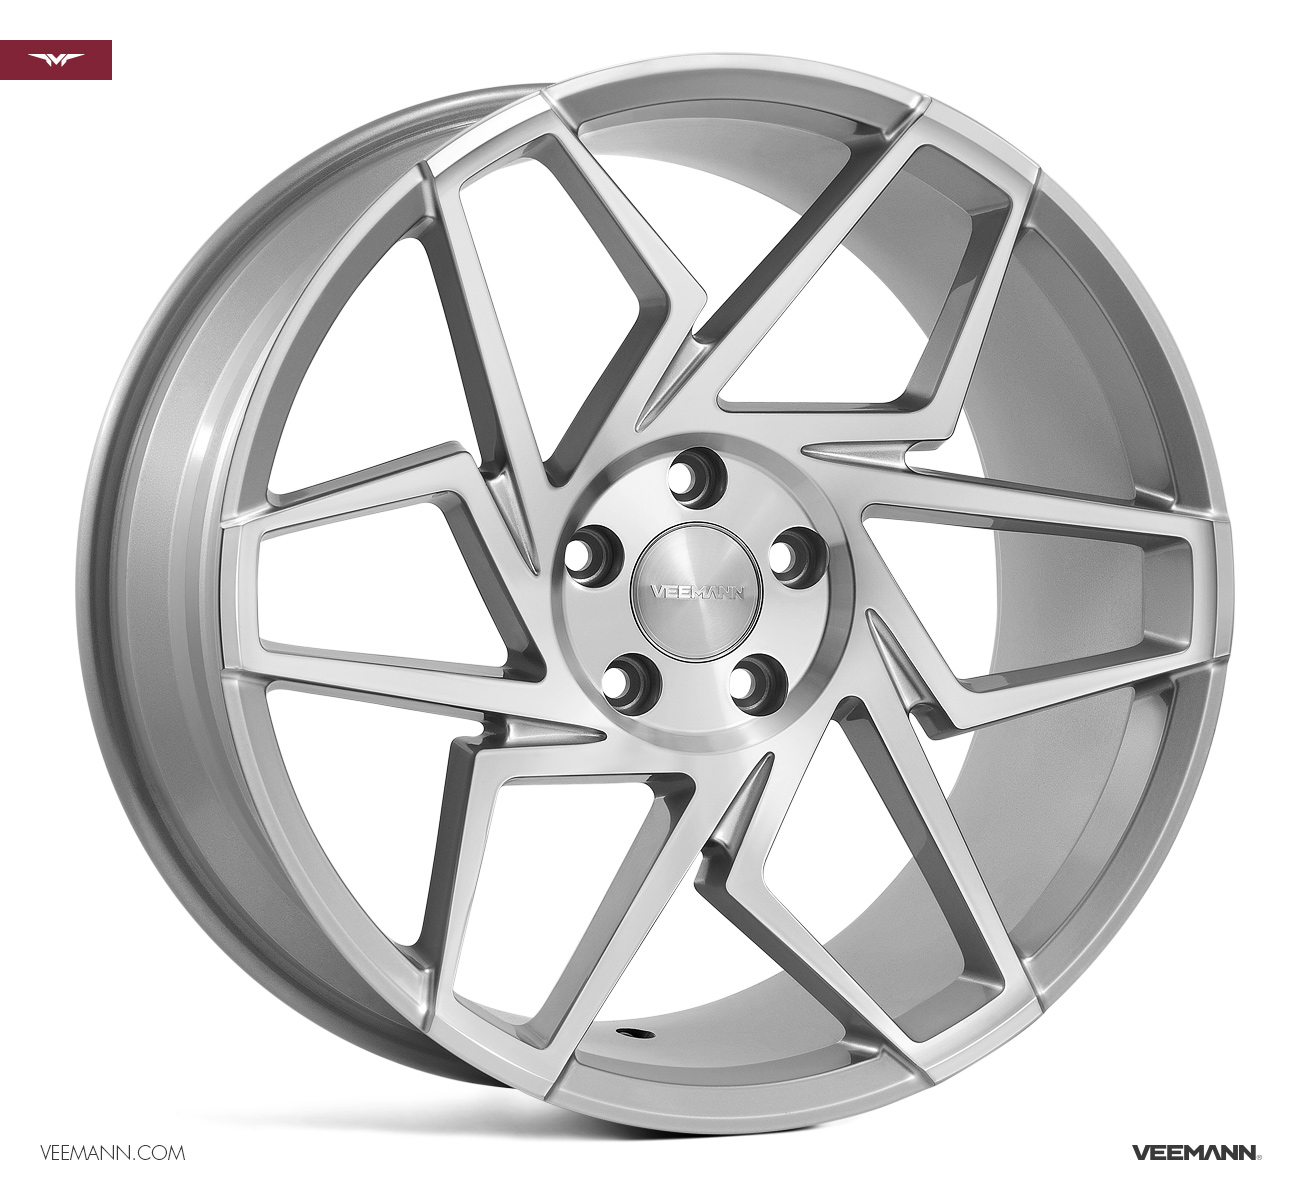 NEW 20  VEEMANN V FS27R ALLOY WHEELS IN SILVER POL WITH DEEPER CONCAVE 10  REAR